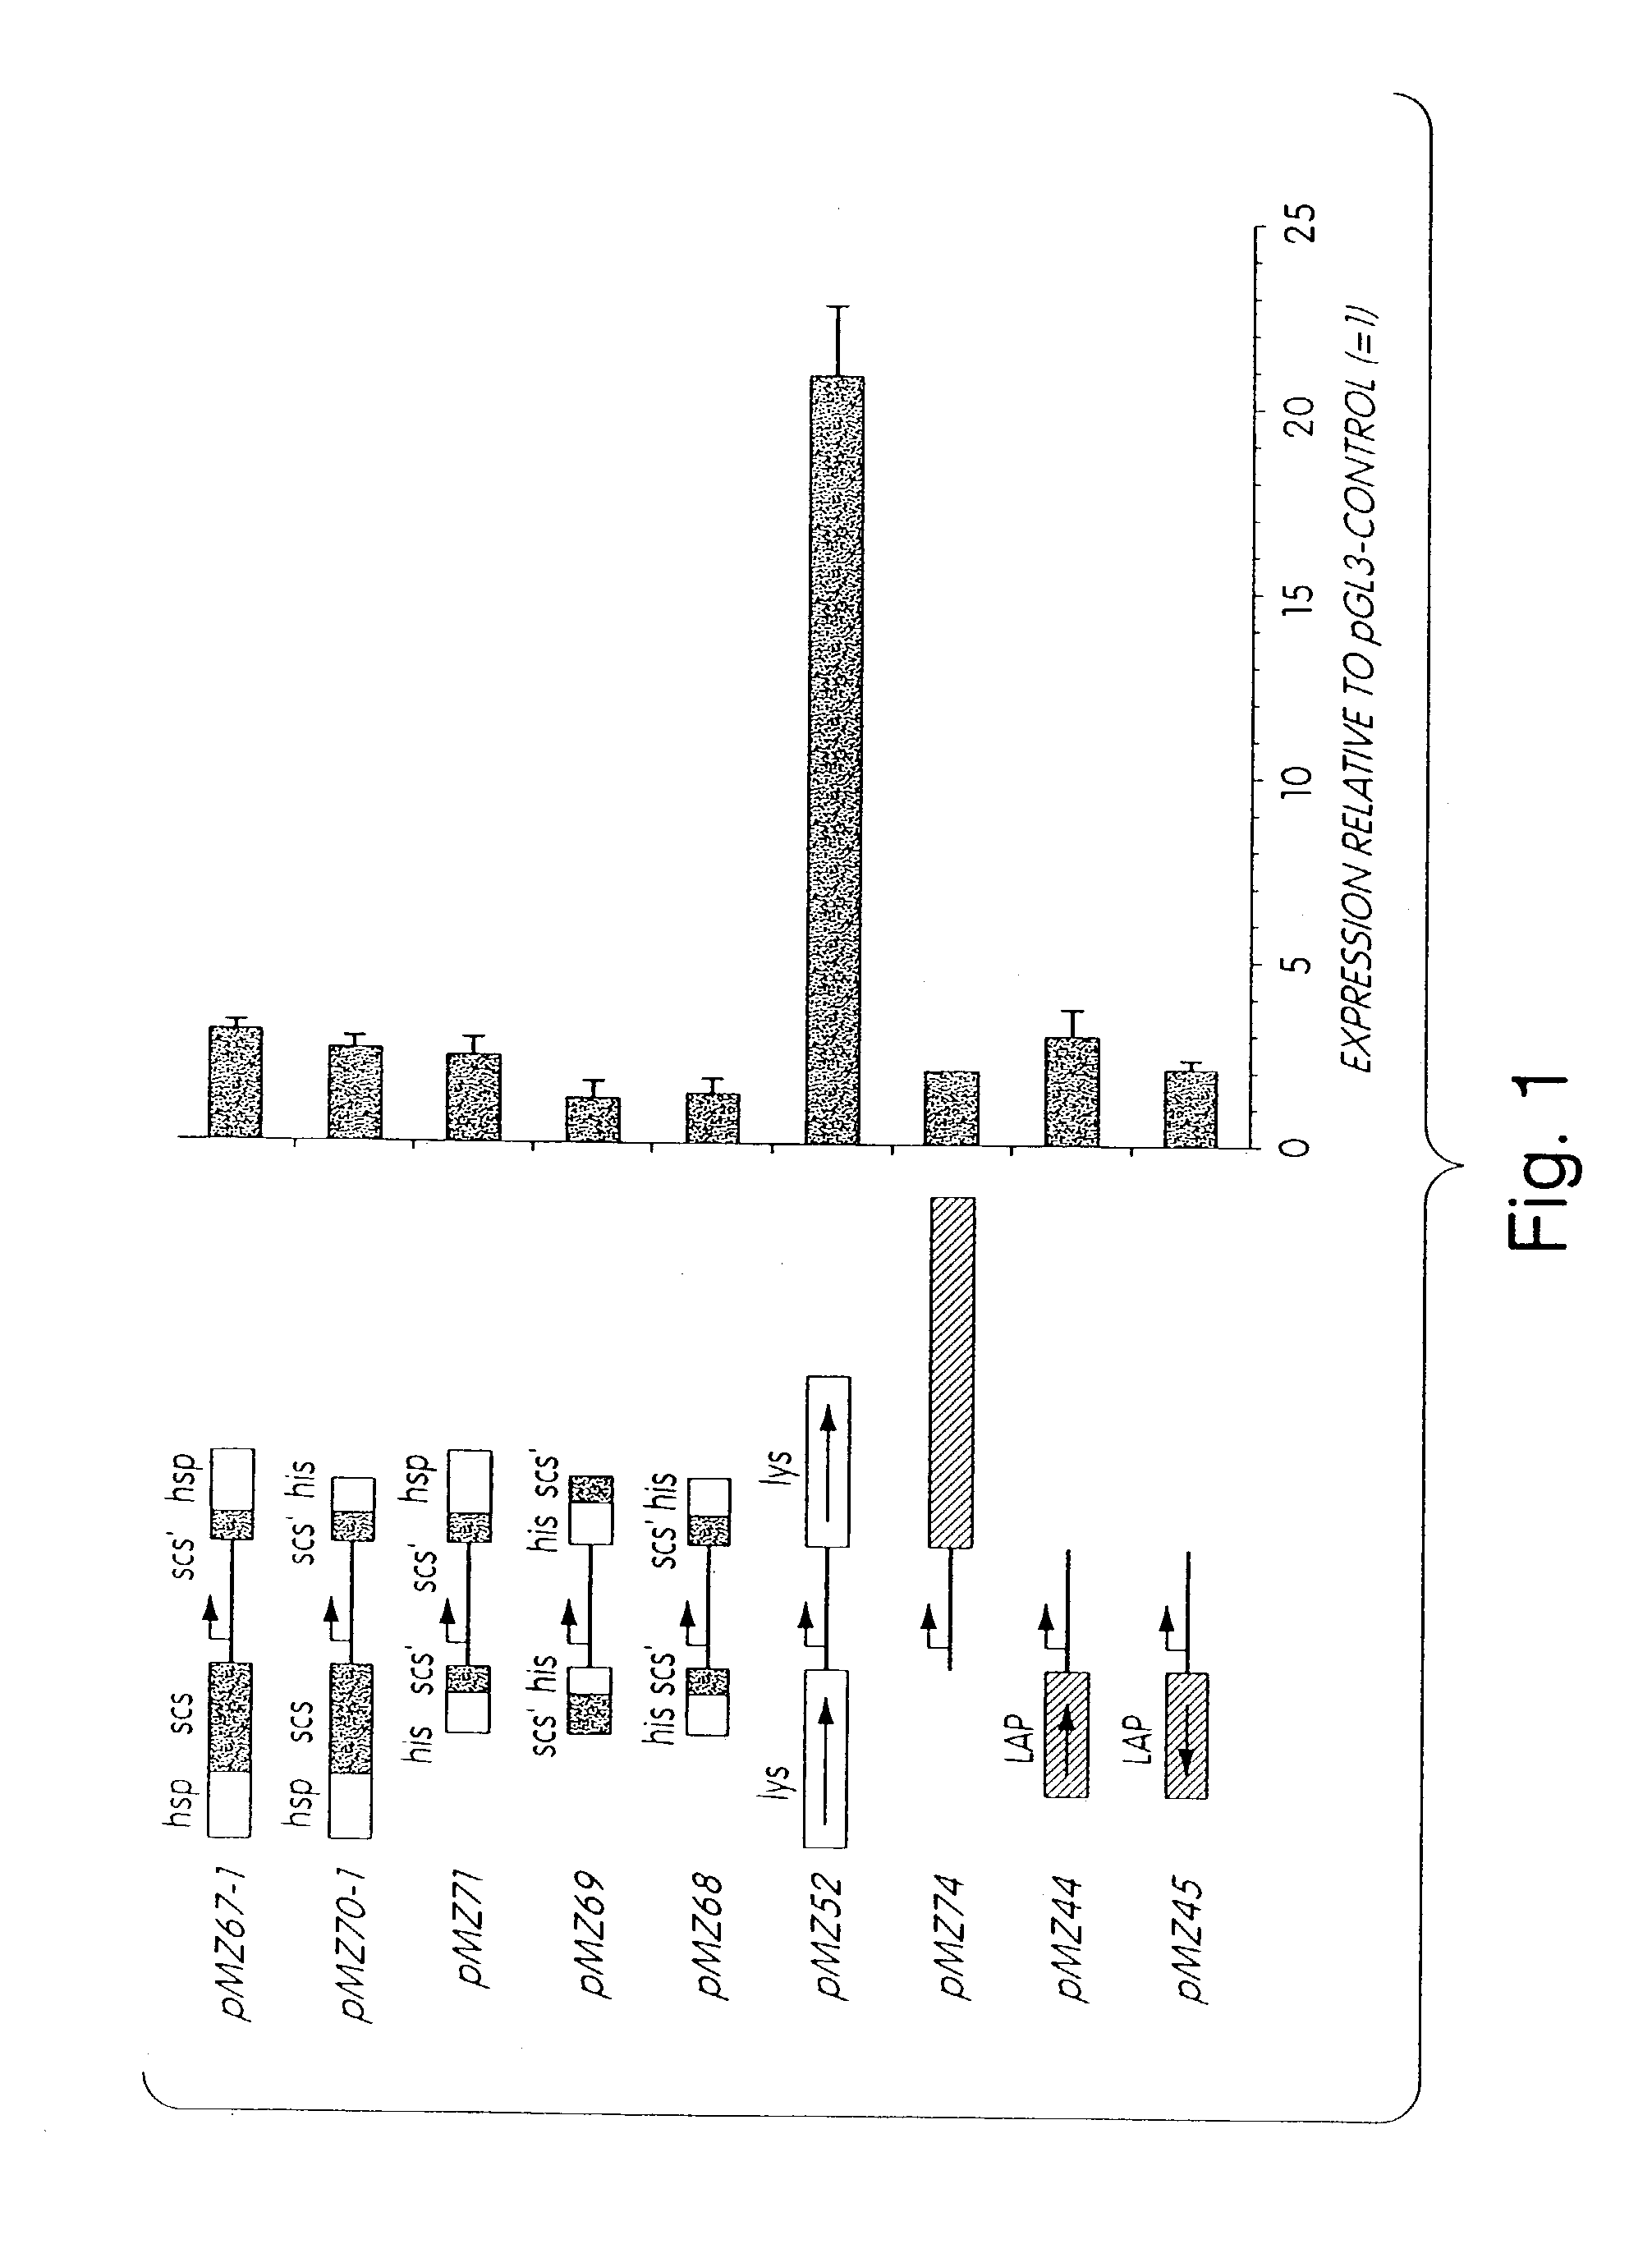 Matrix attachment regions and methods for use thereof